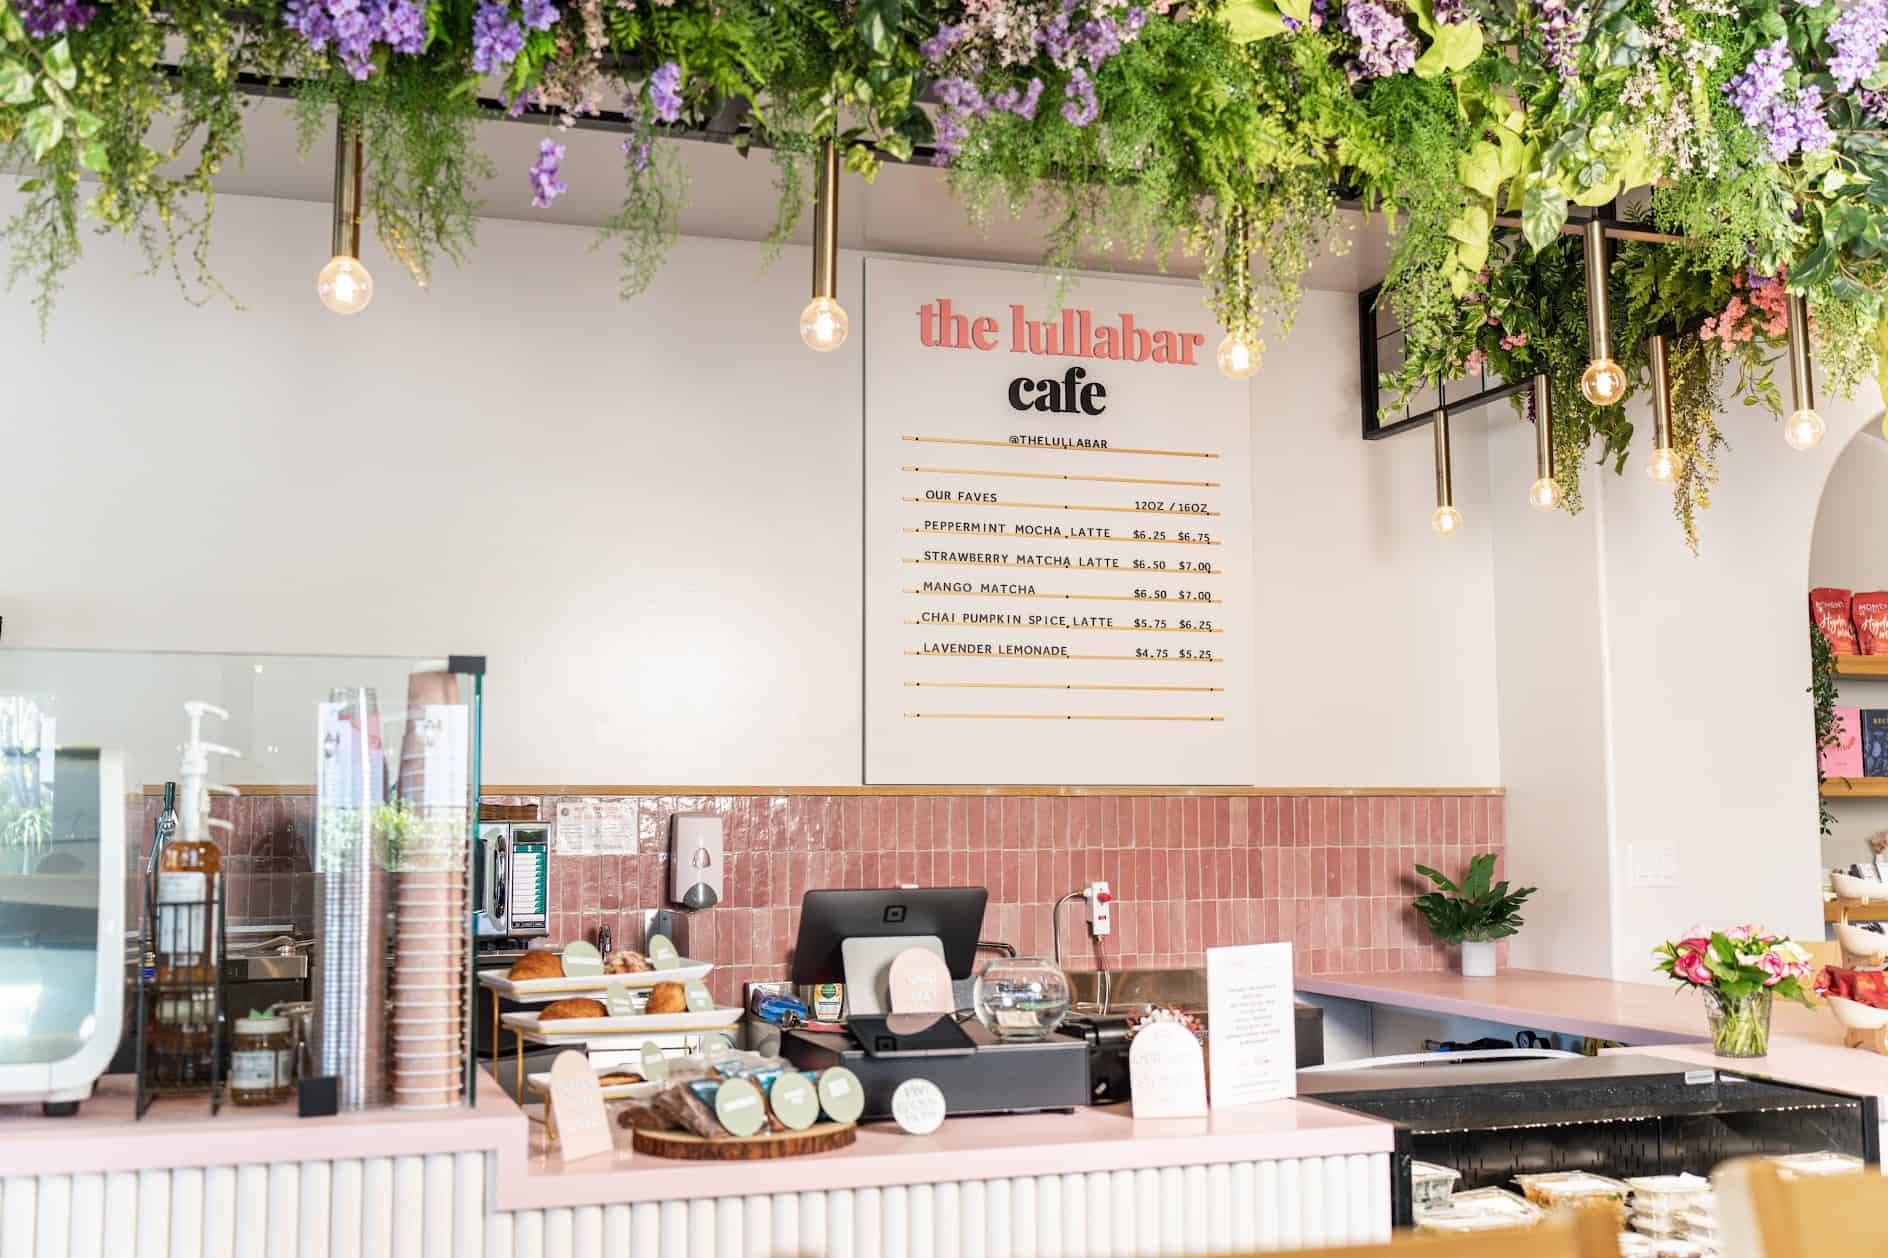 A cafe with delicious healthy items